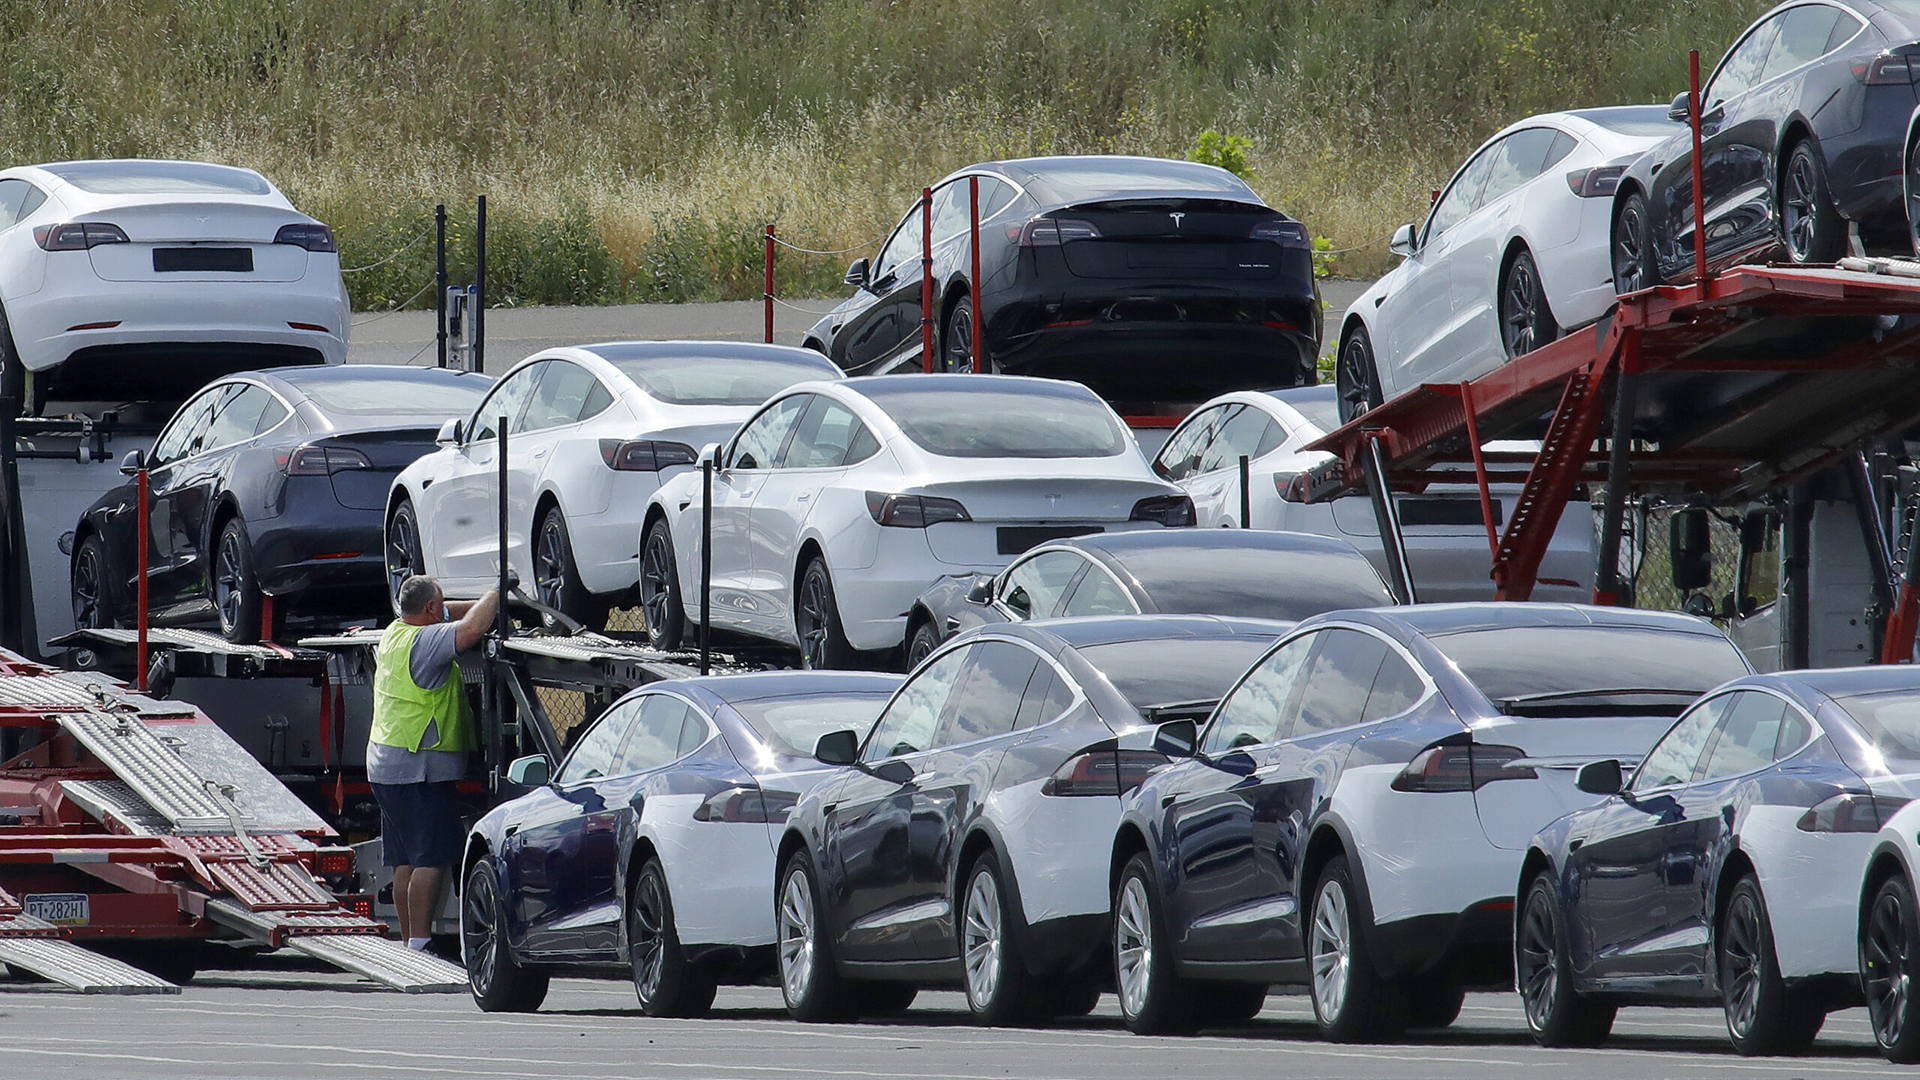 FILE - Tesla cars are loaded onto carriers at the Tesla electric car plant on May 13, 2020, in Fremont, Calif. Tesla is recalling nearly 363,000 vehicles with its “Full Self-Driving” system to fix problems with the way it behaves around intersections and following posted speed limits, the National Highway Traffic Safety Administration announced Thursday, Feb. 16, 2023. (AP Photo/Ben Margot, File)